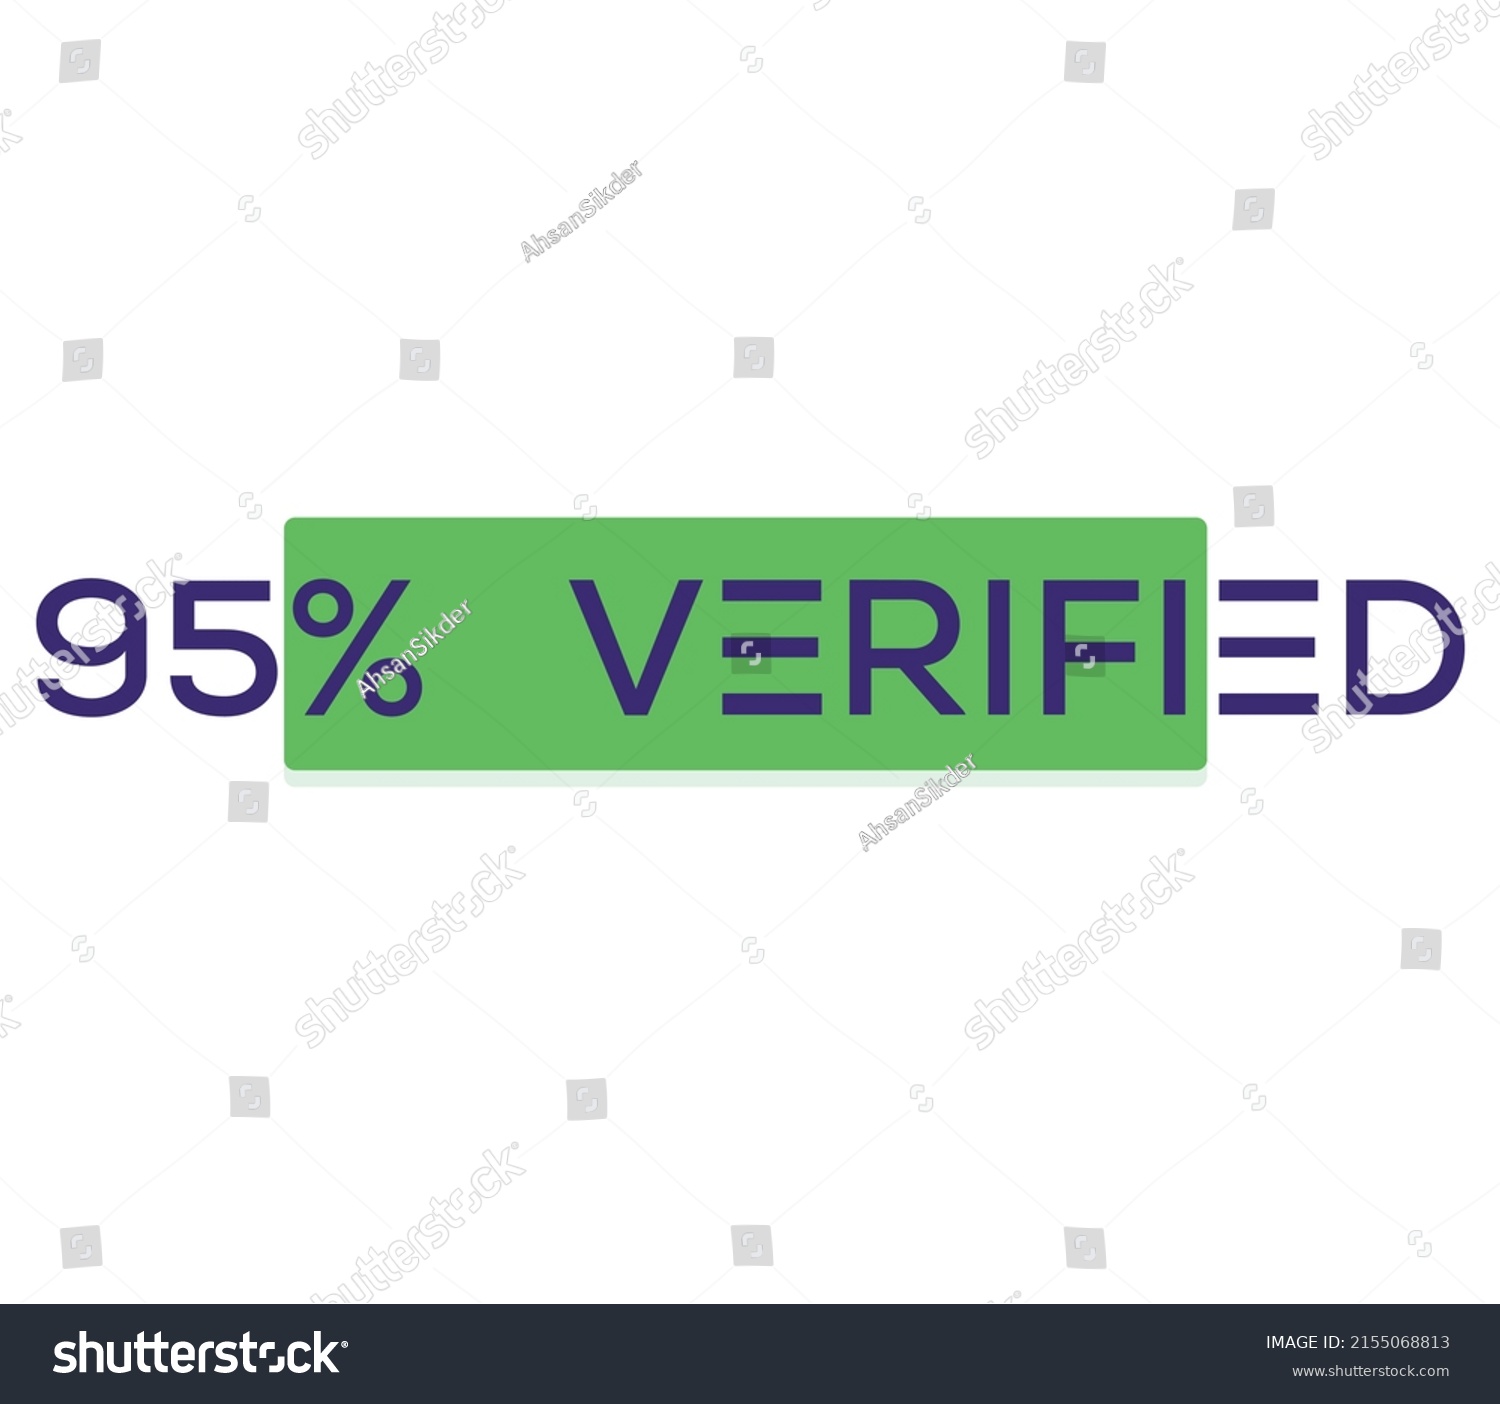 95% percentage verified vector art illustration with fantastic font and green color #2155068813